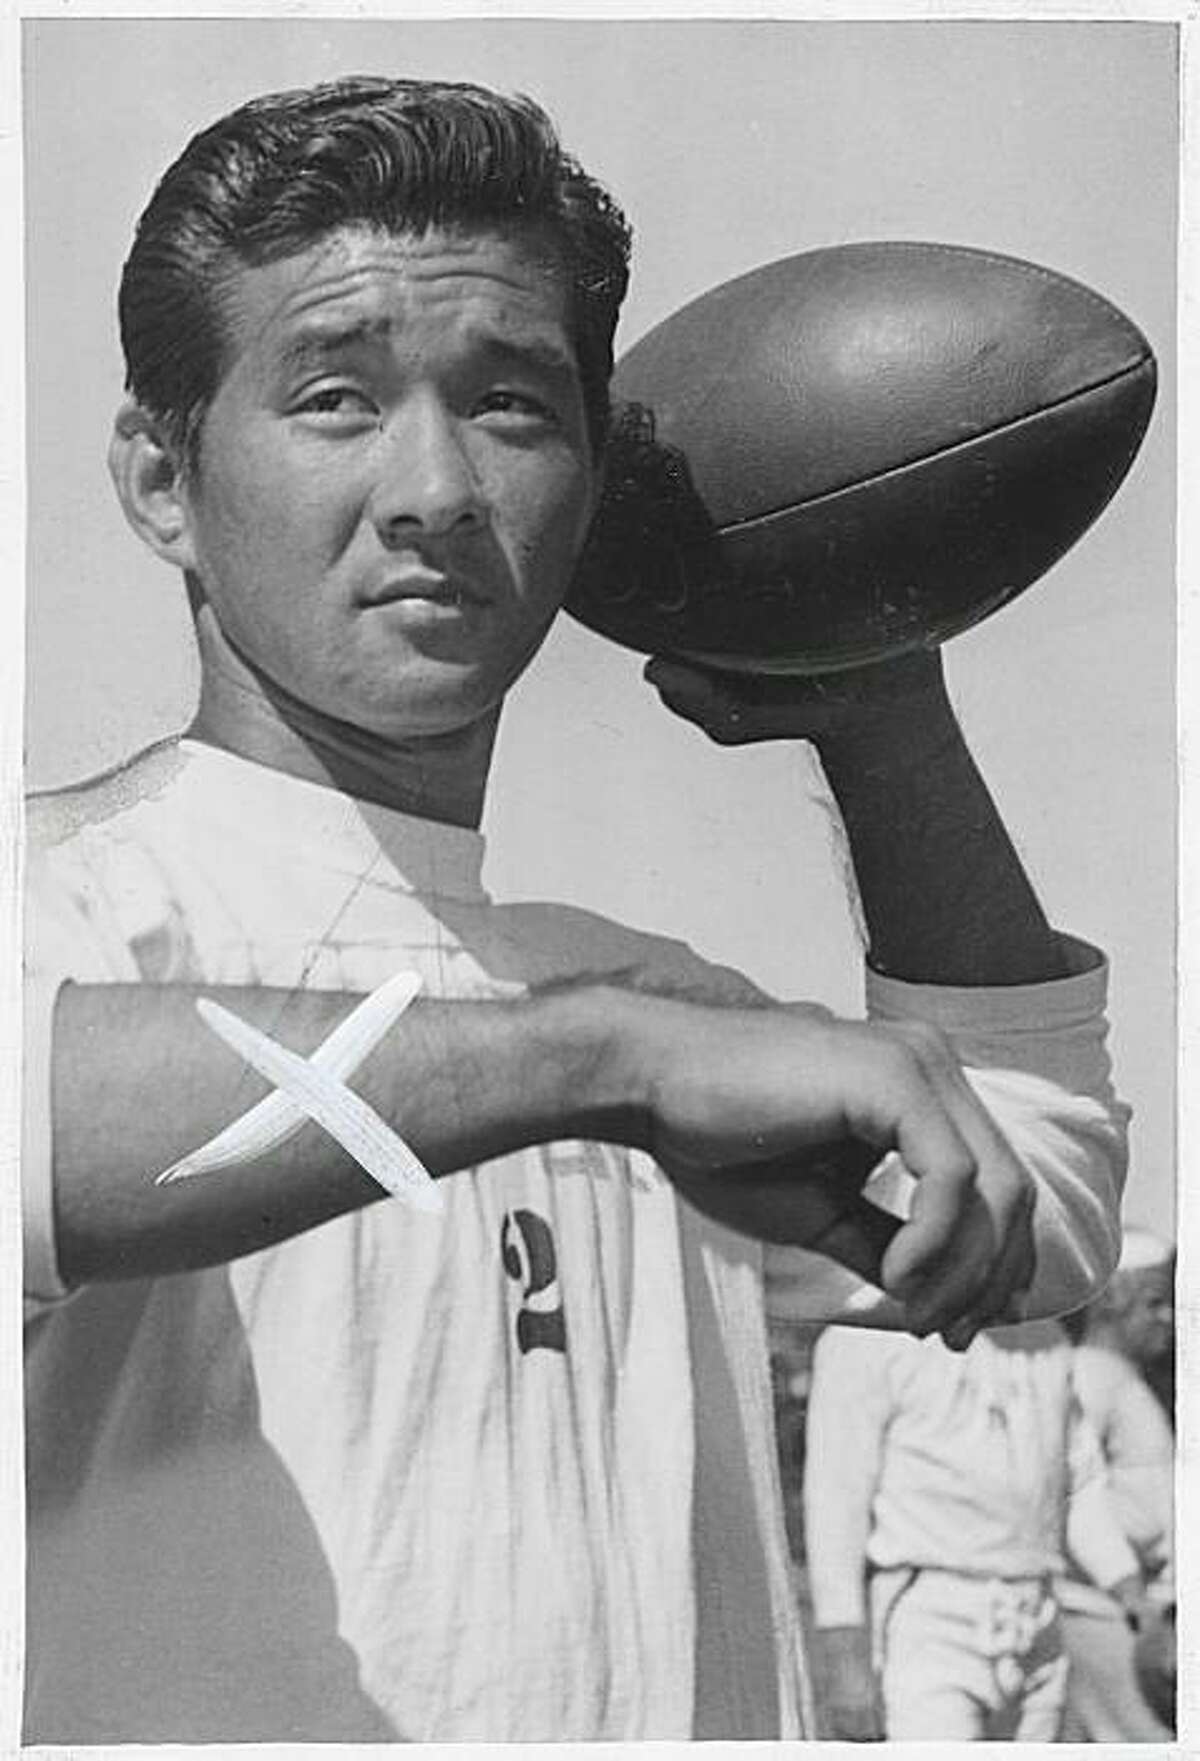 Wally Yonamine shown with the 49ers in 1947. He was a running back with the team for one season. Photo was taken: 7/28/1947.